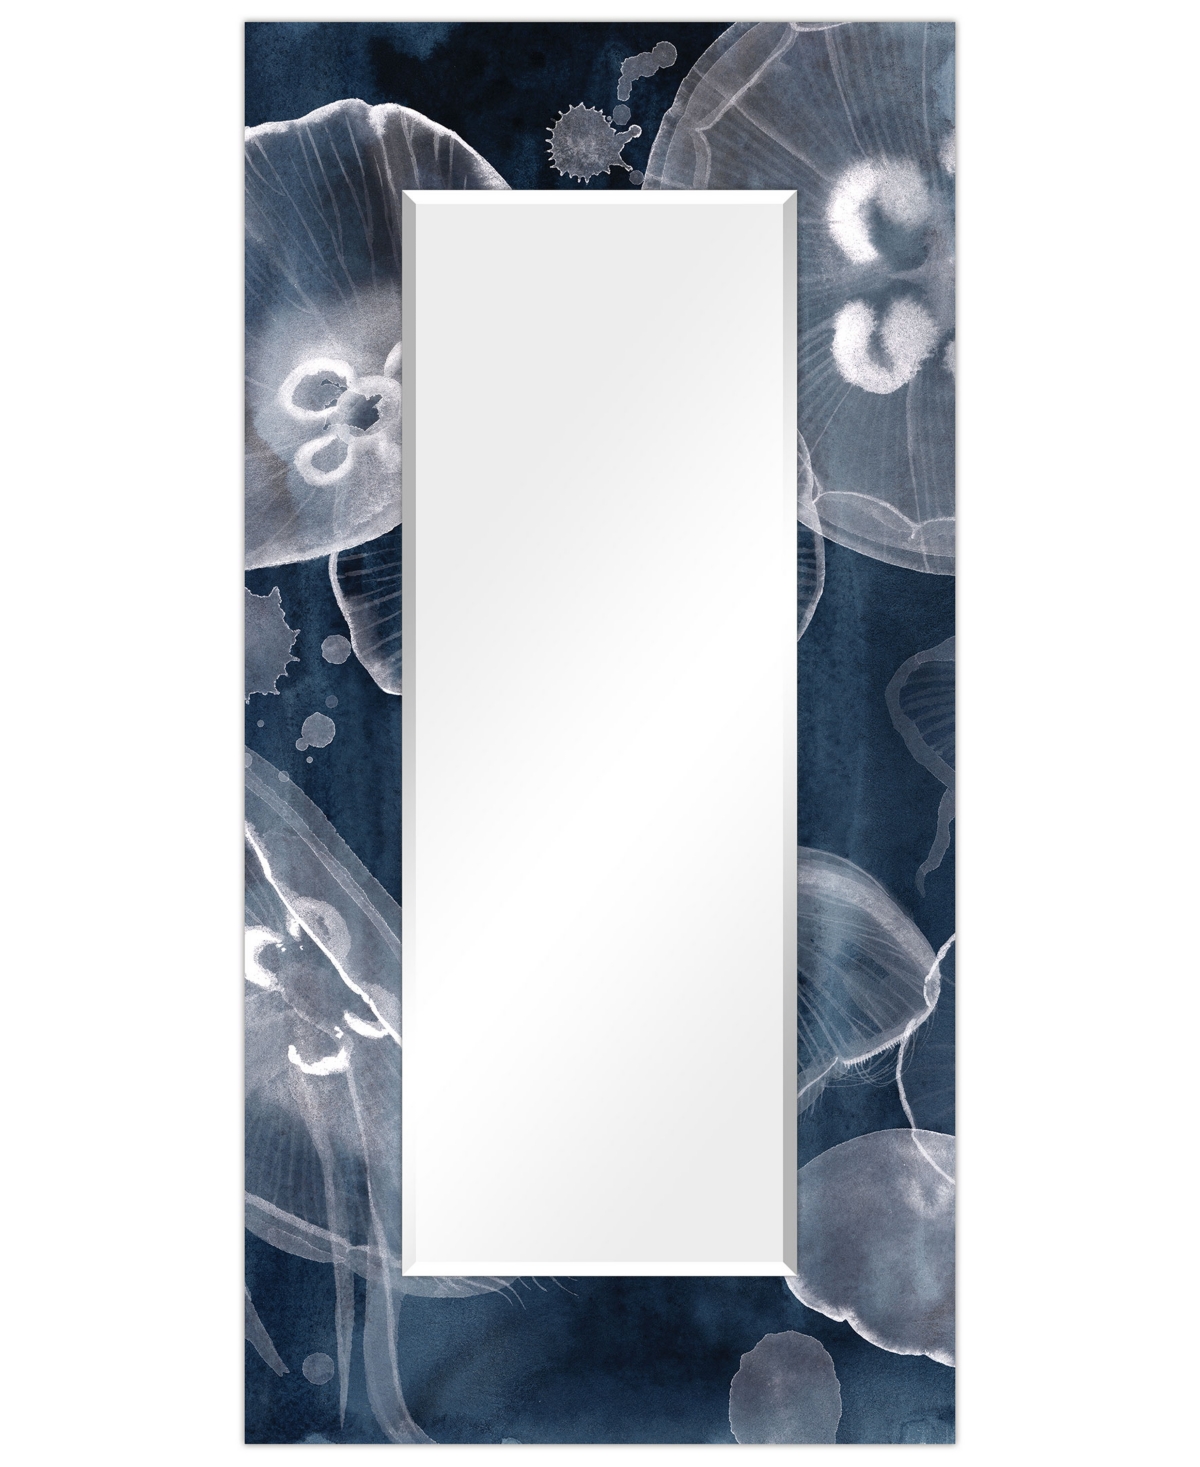 Empire Art Direct "moon Jellies" Rectangular Beveled Mirror On Free Floating Printed Tempered Art Glass, 72" X 36" X 0 In Gray